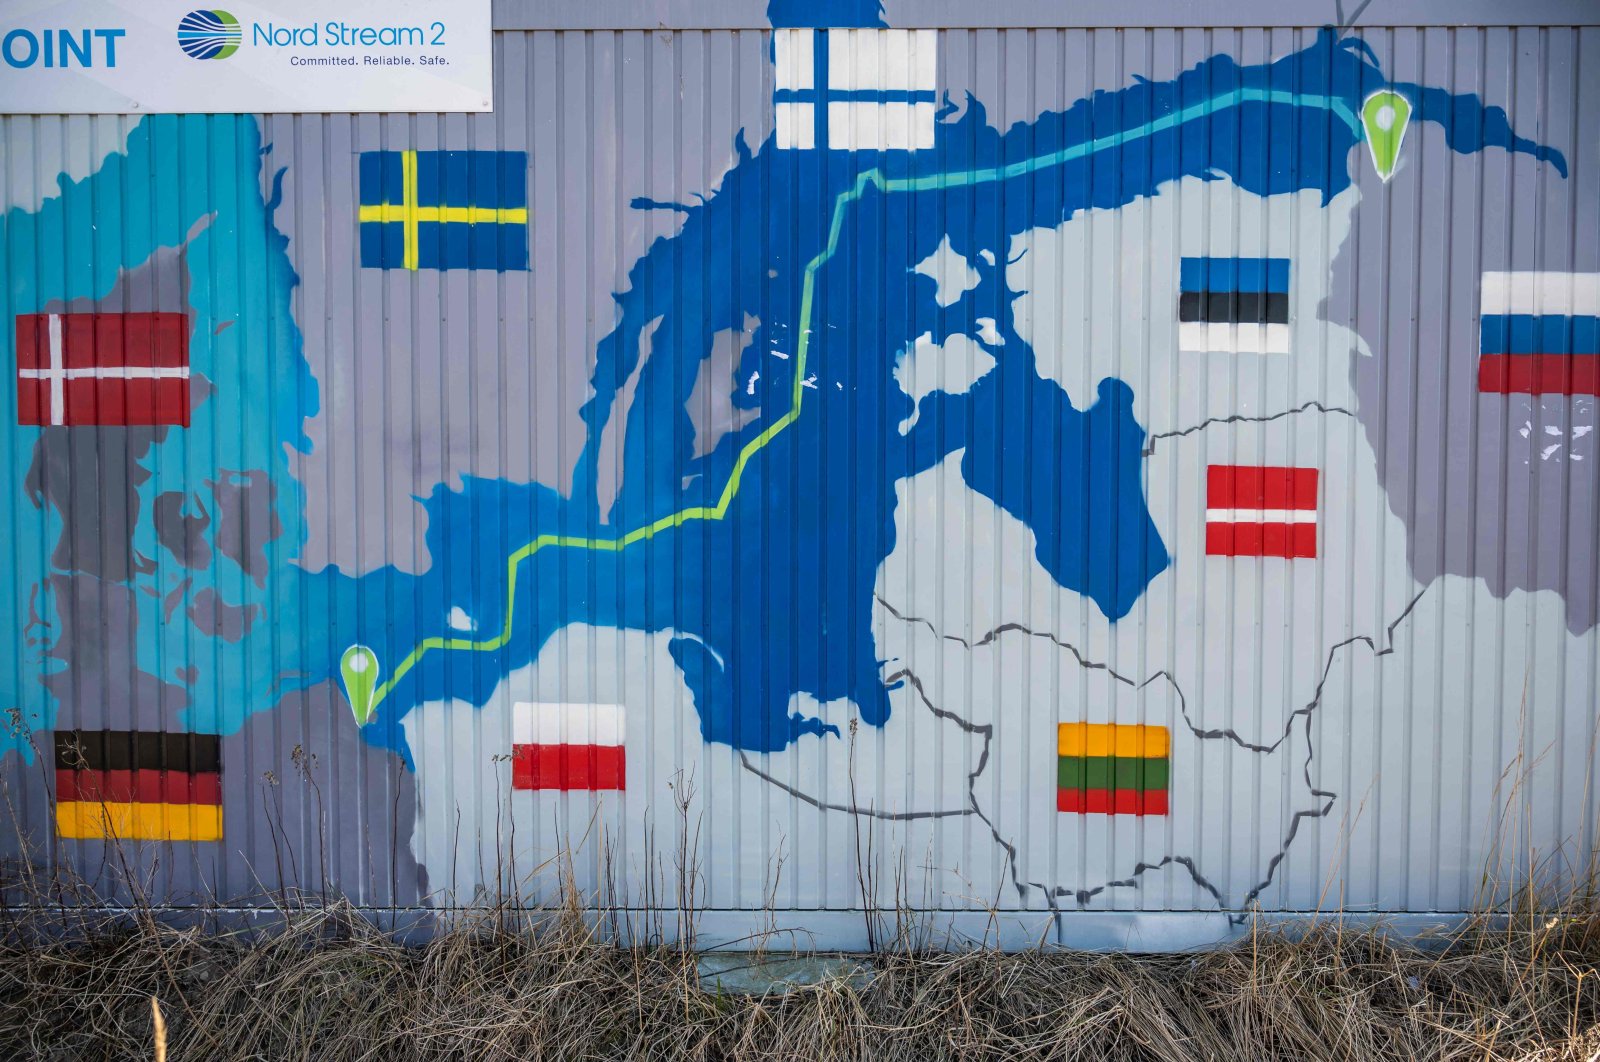 A container decorated with a map showing the position of the Nord Stream 2 gas pipeline is seen in Lubmin&#039;s industrial park, northeastern Germany, March 1, 2022. (AFP Photo)